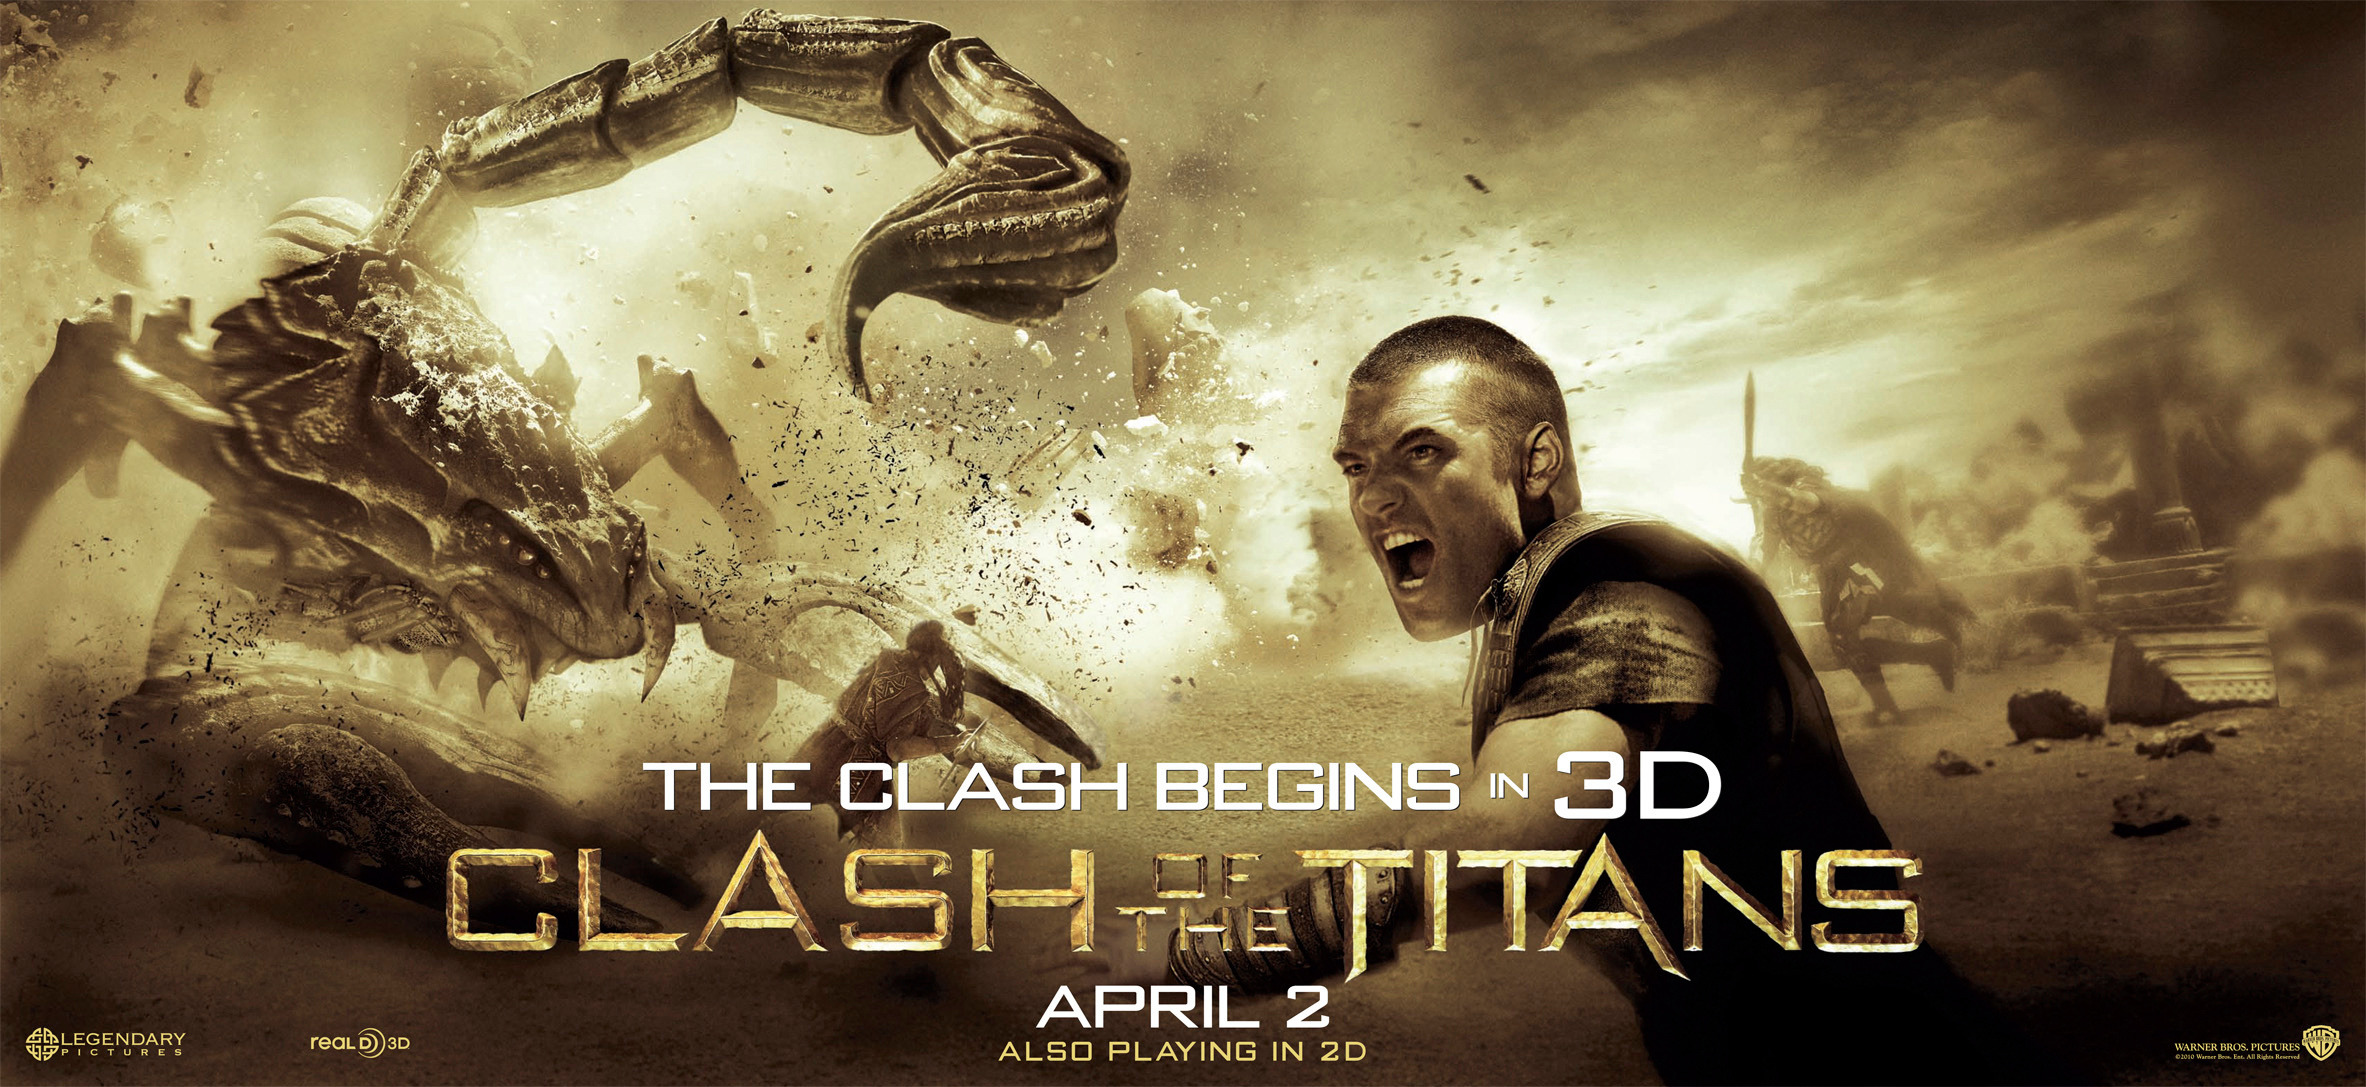 Mega Sized Movie Poster Image for Clash of the Titans (#10 of 11)